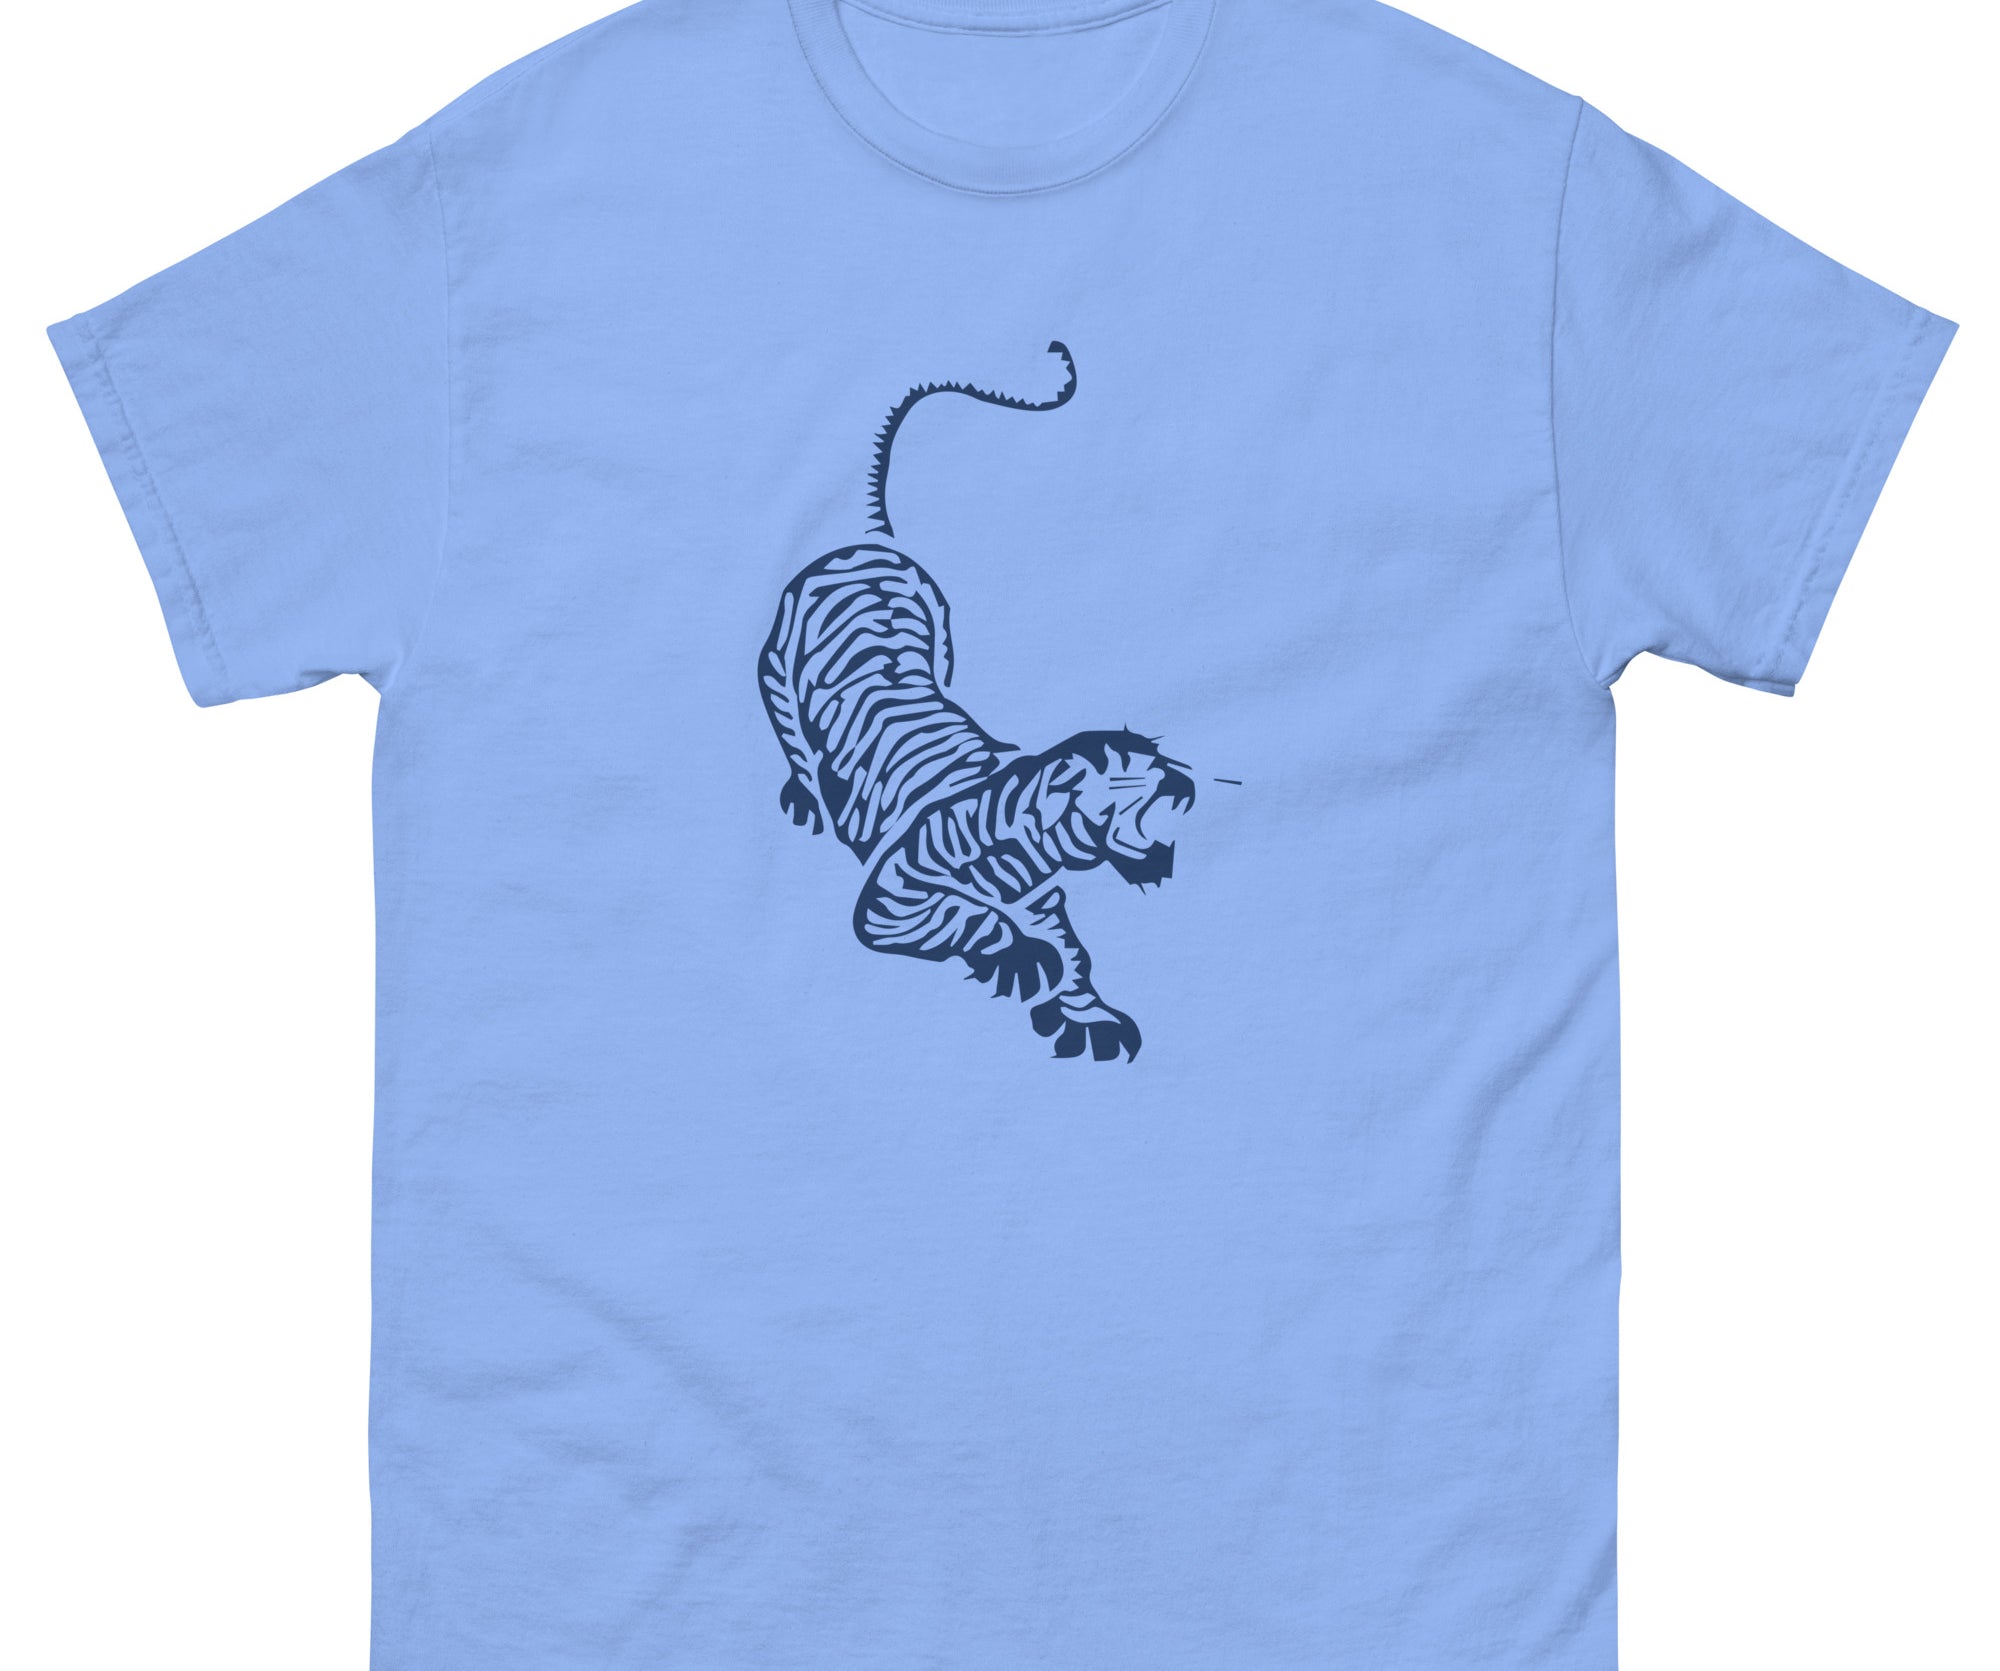 Jerry Garcia Eco T-Shirt Tiger Baby Blue - Section 119